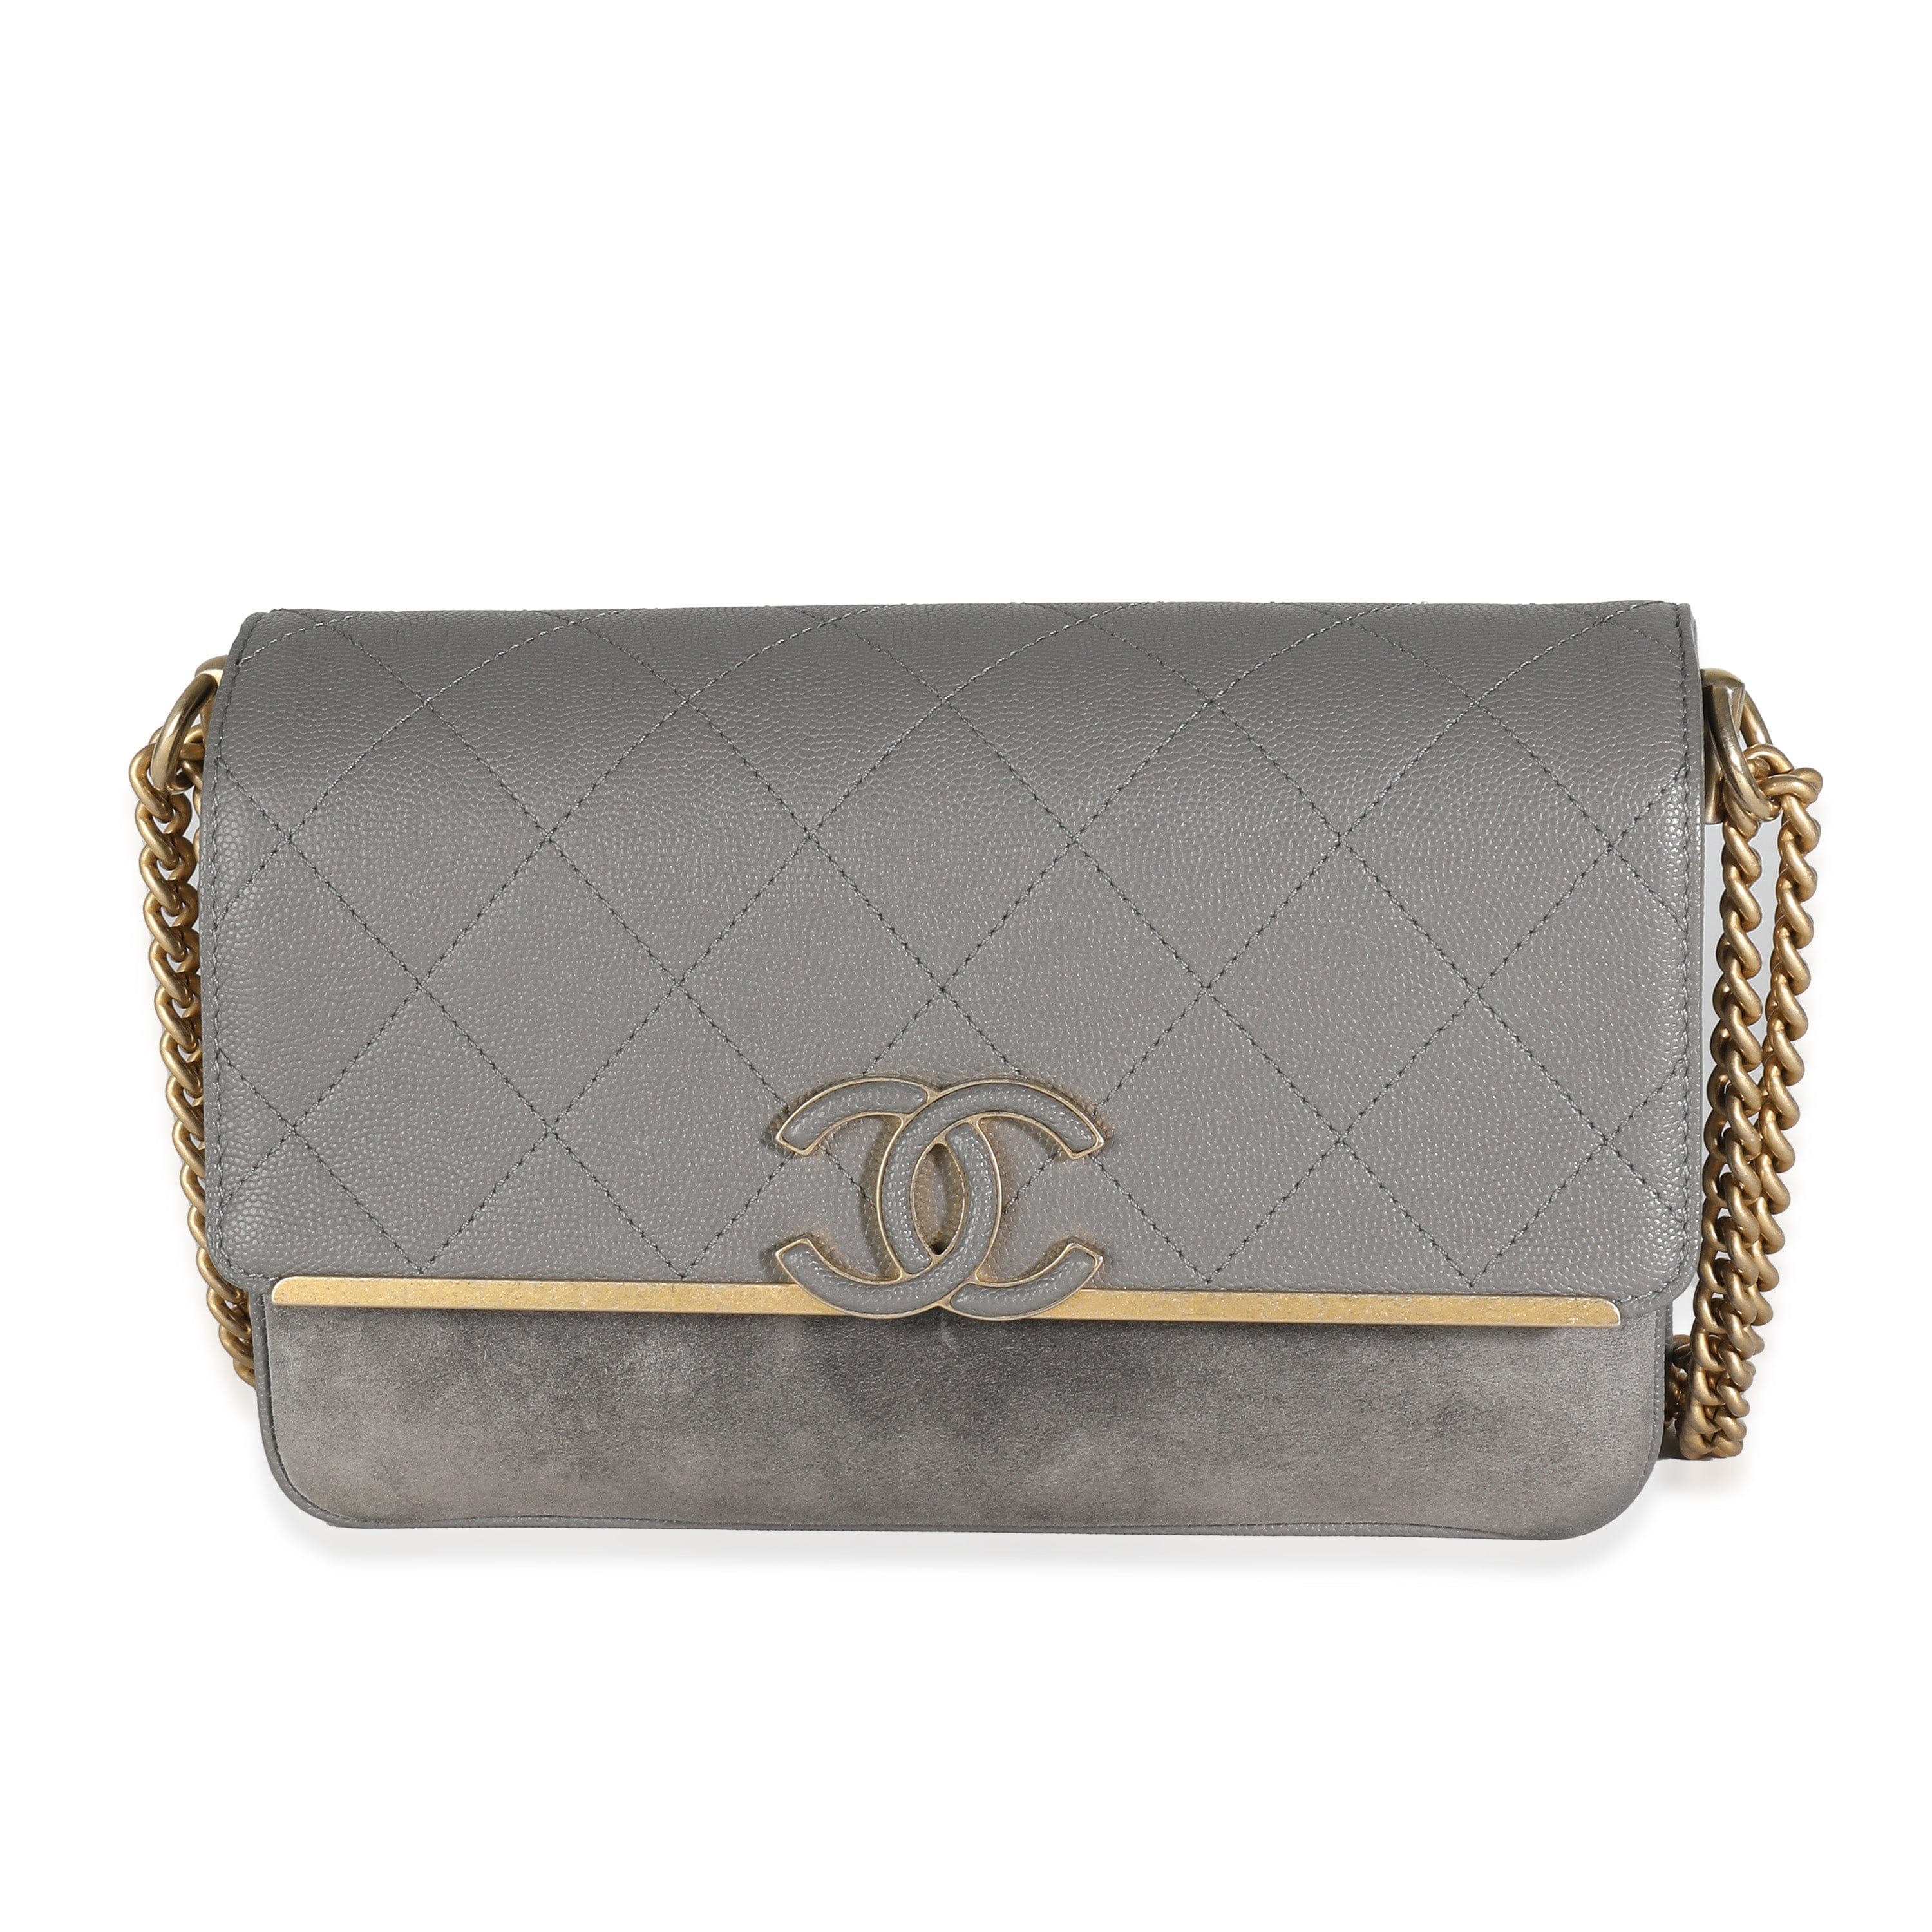 Chanel Chanel Grey Quilted Caviar Suede Coco Flap Bag